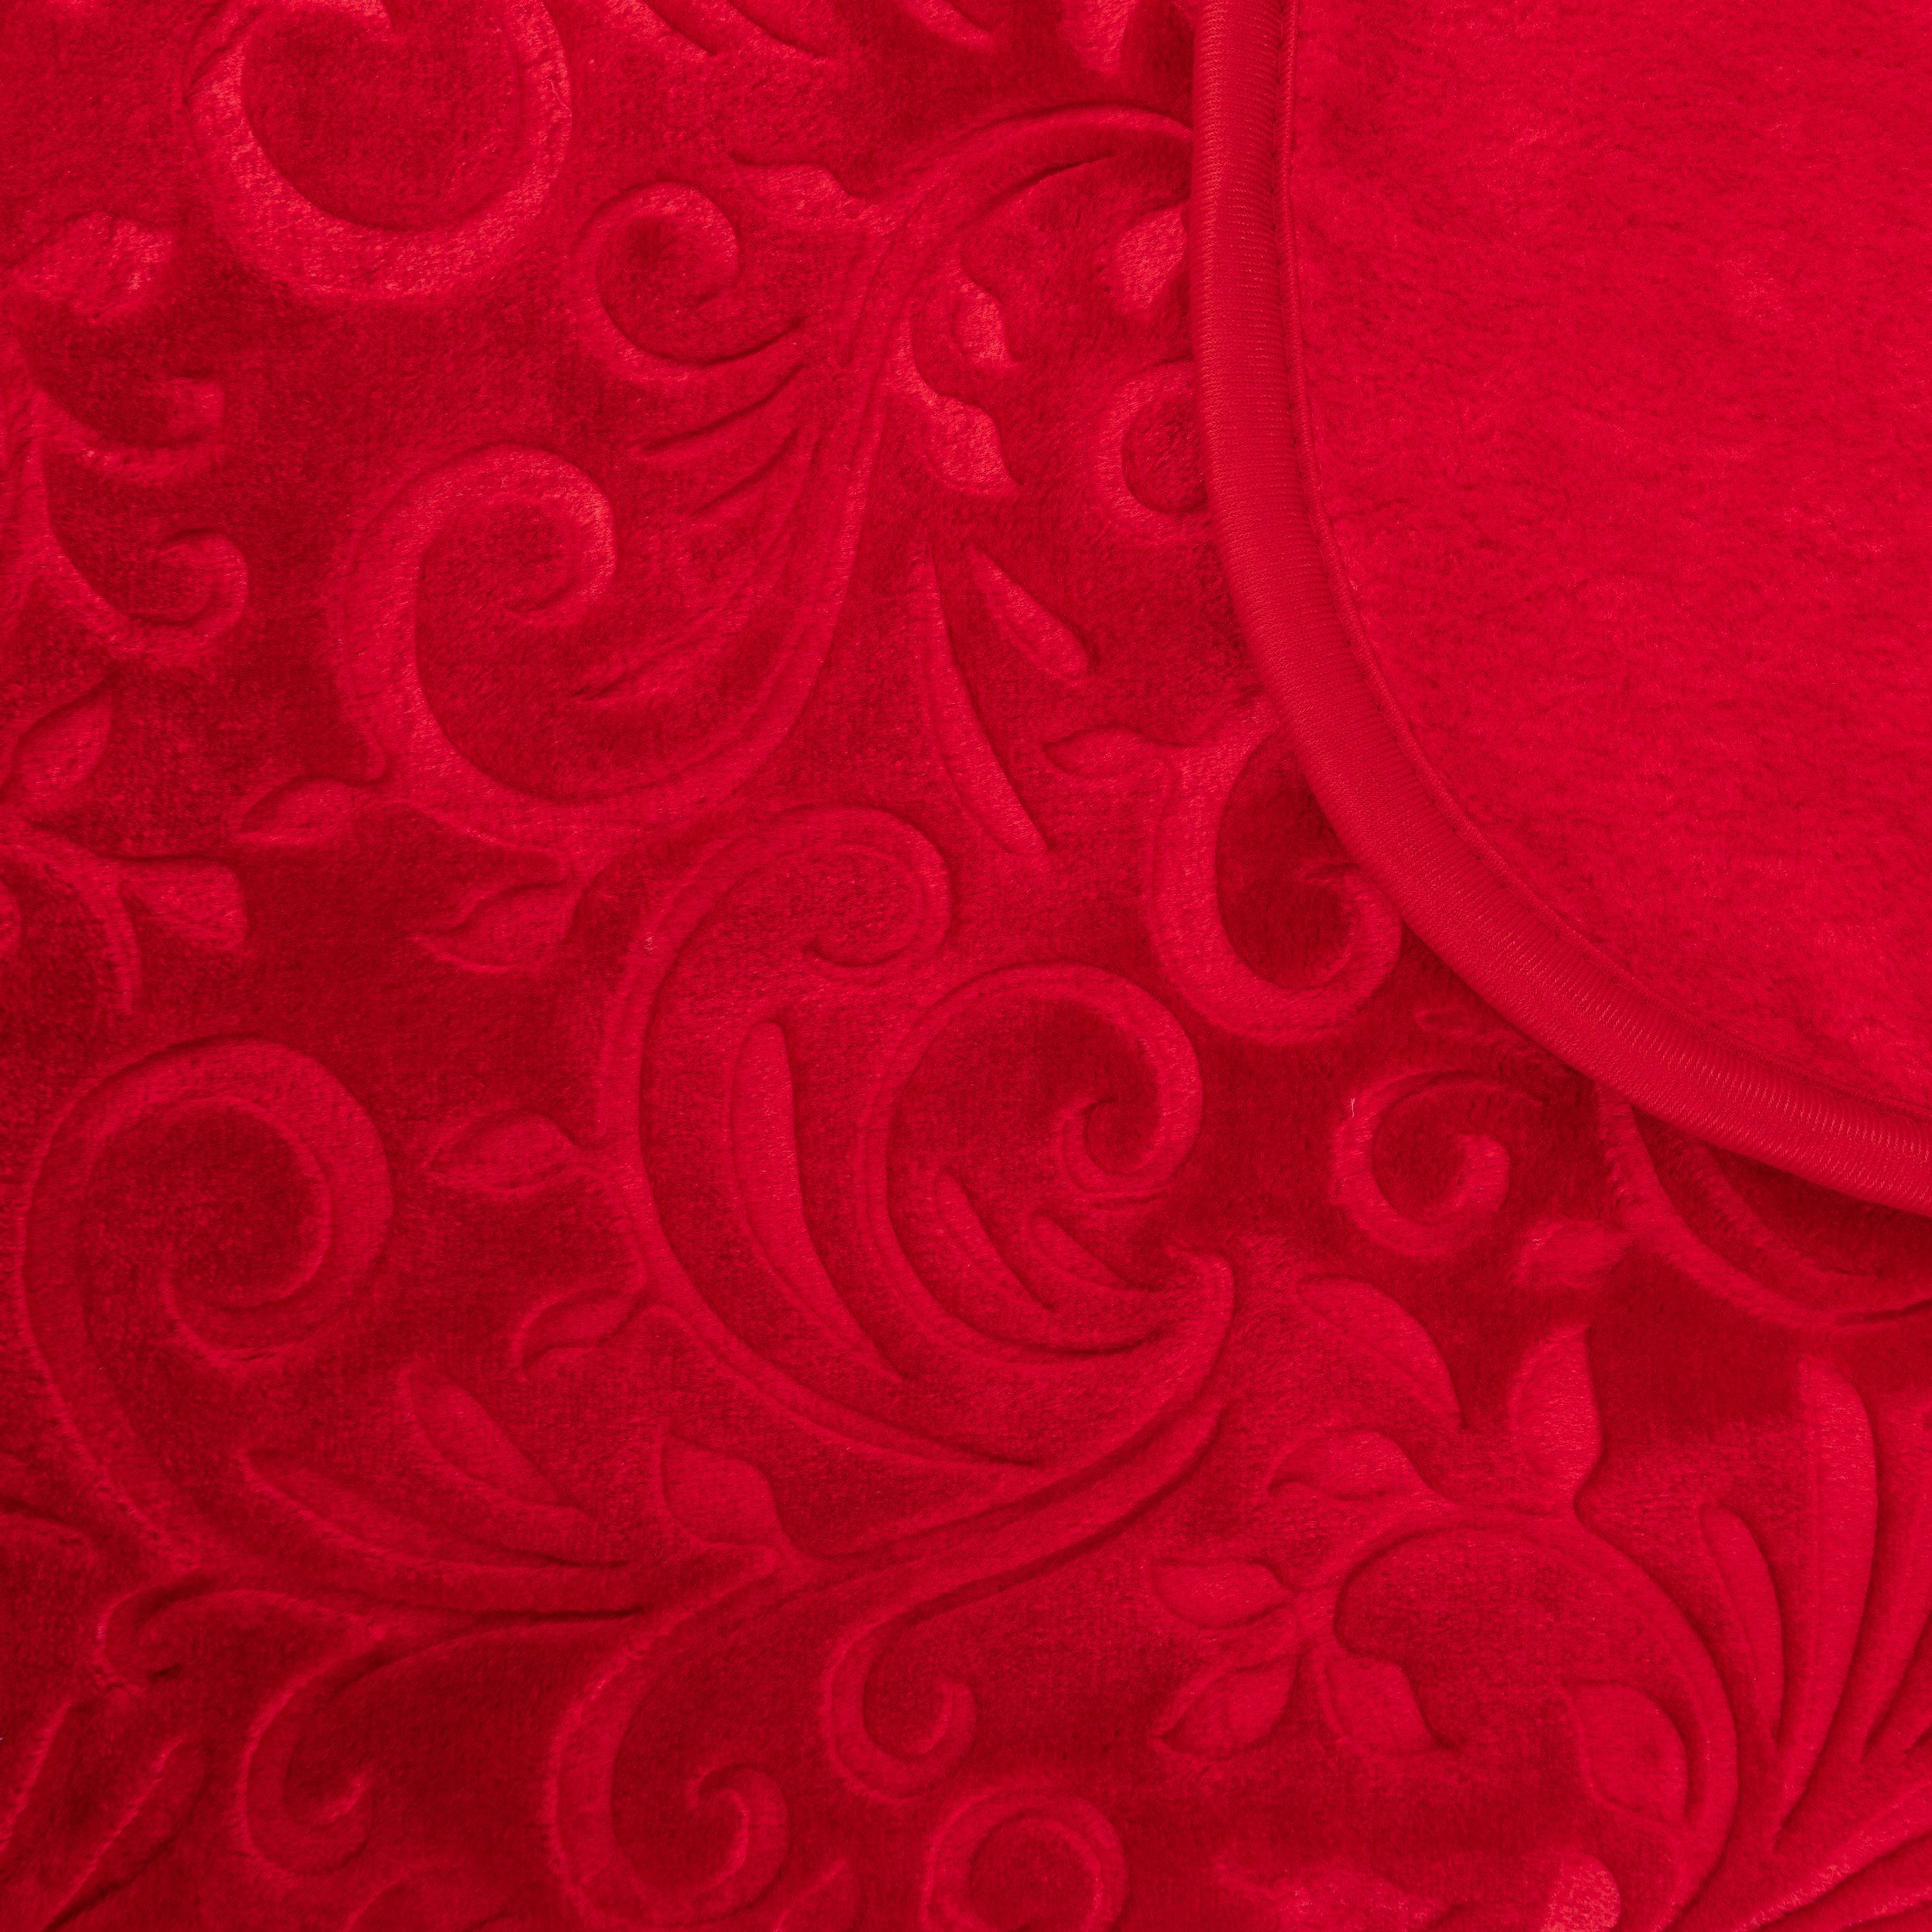 Deluxe, Paisley rot Traumschloss, Wohndecke